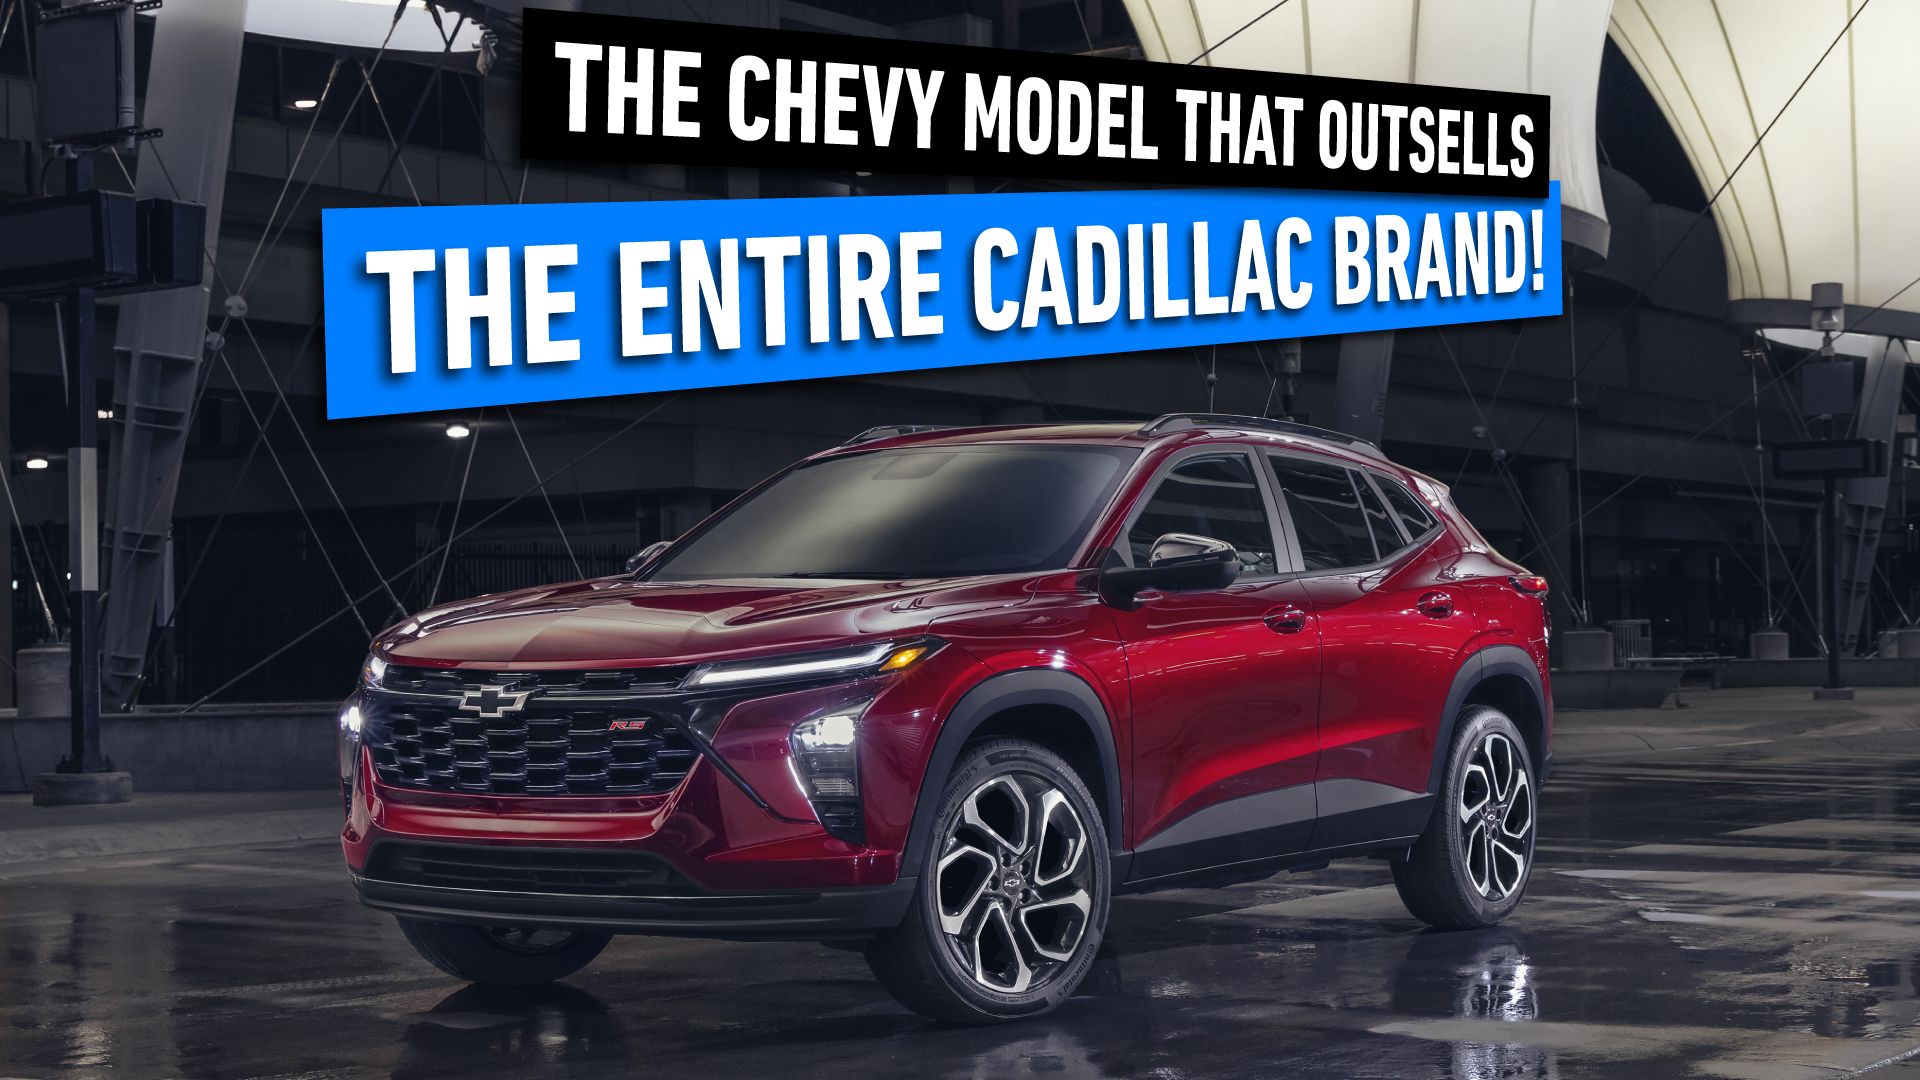 Chevy-Model-That-Outsells-The-Entire-Cadillac-Brand